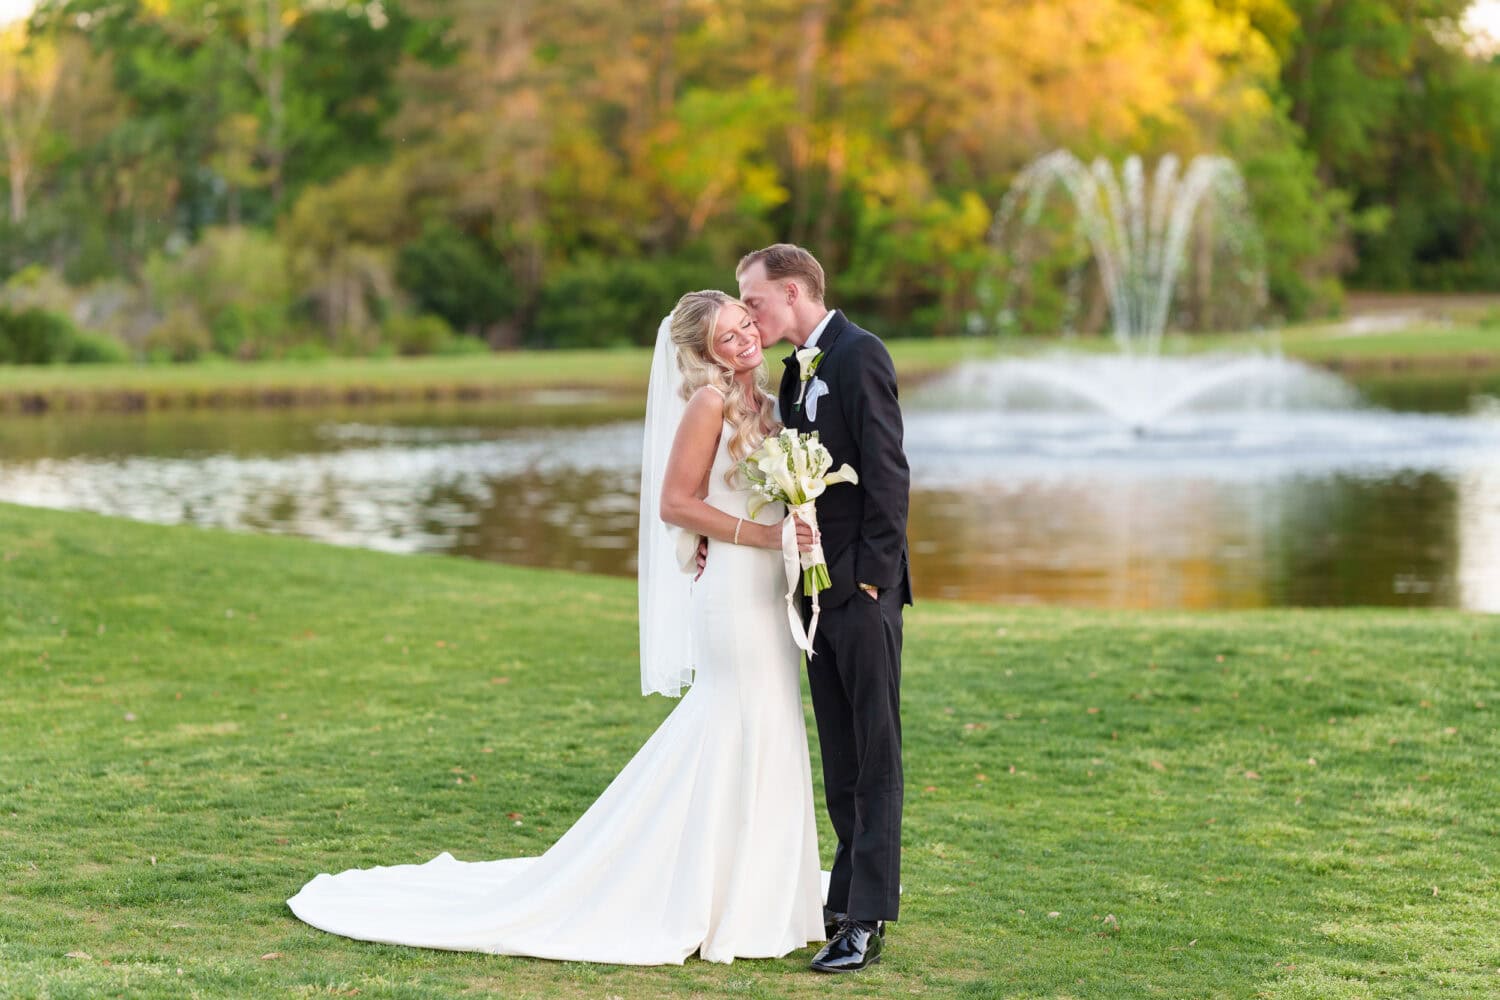 Portraits of the bride and groom in front of the lake and fountain - Pawleys Plantation